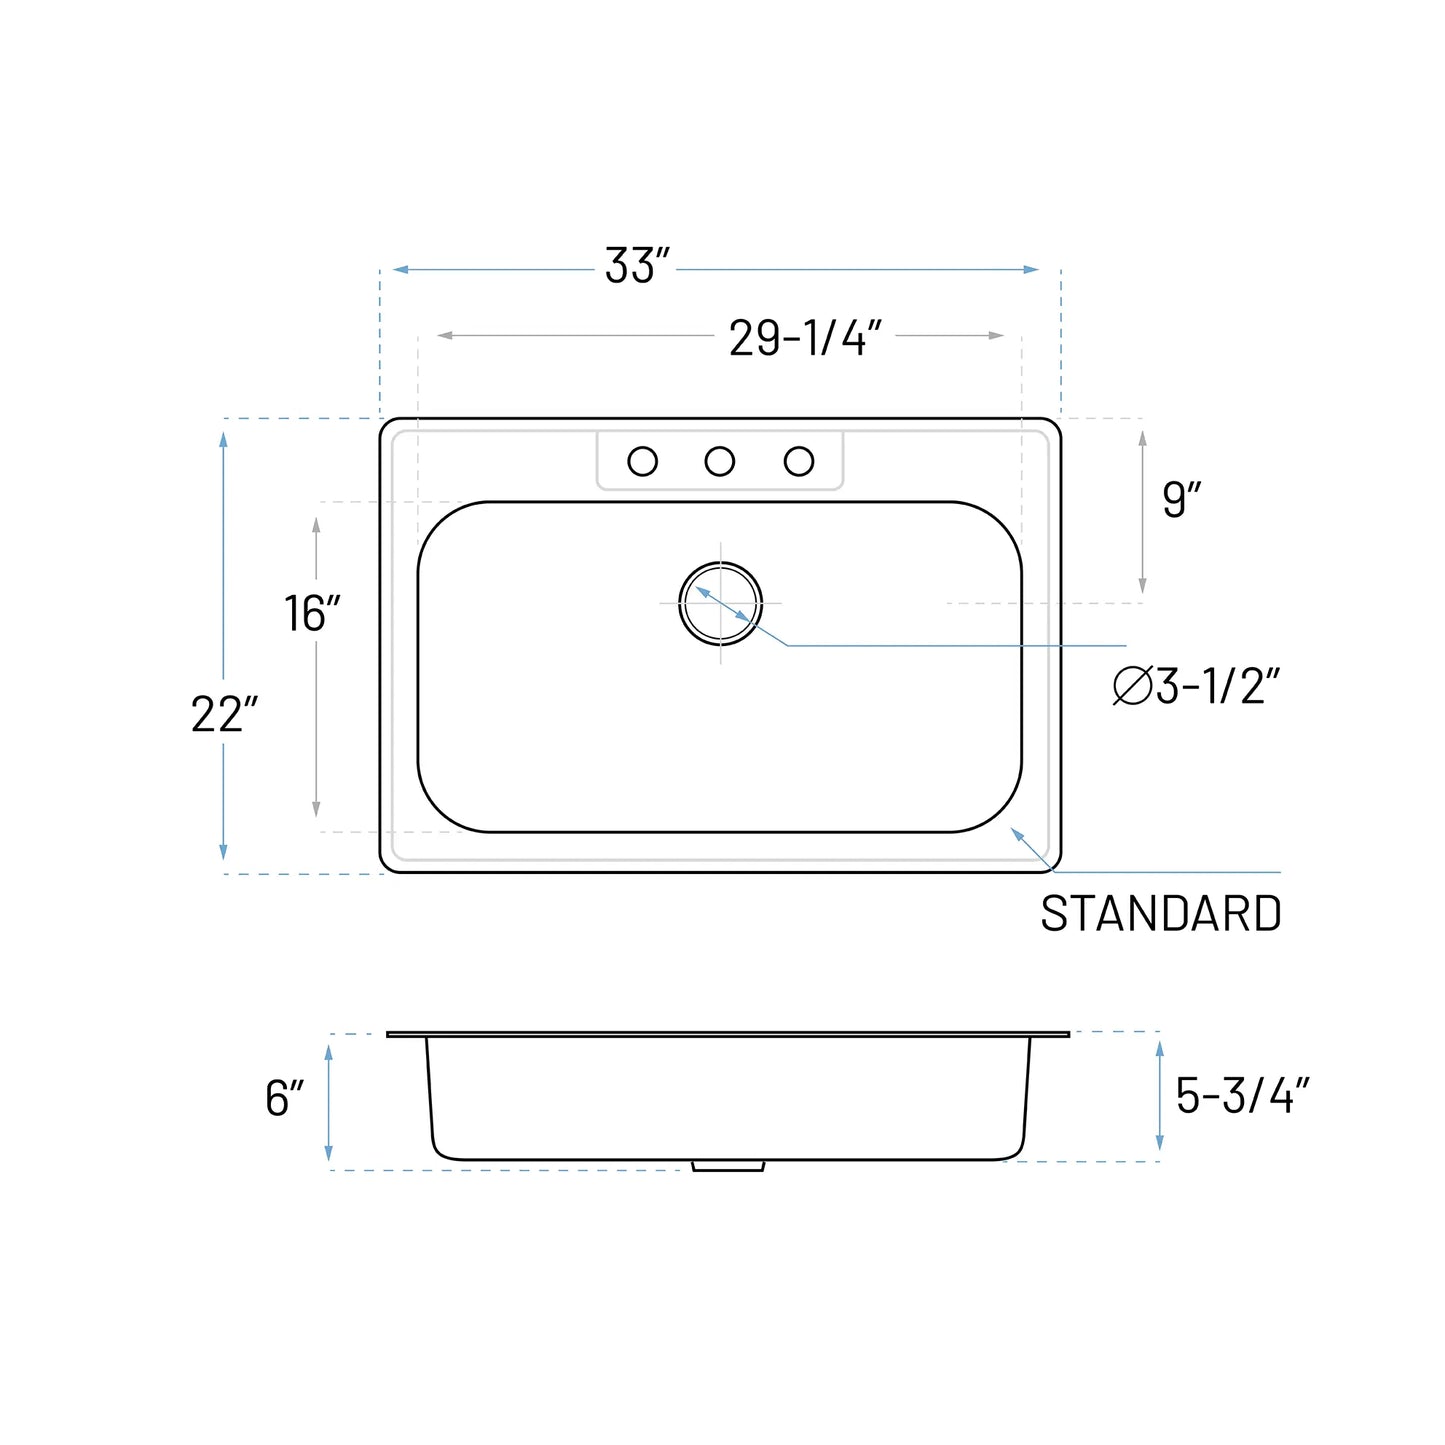 Technical Drawing of an ADA Stainless Steel Kitchen Sink